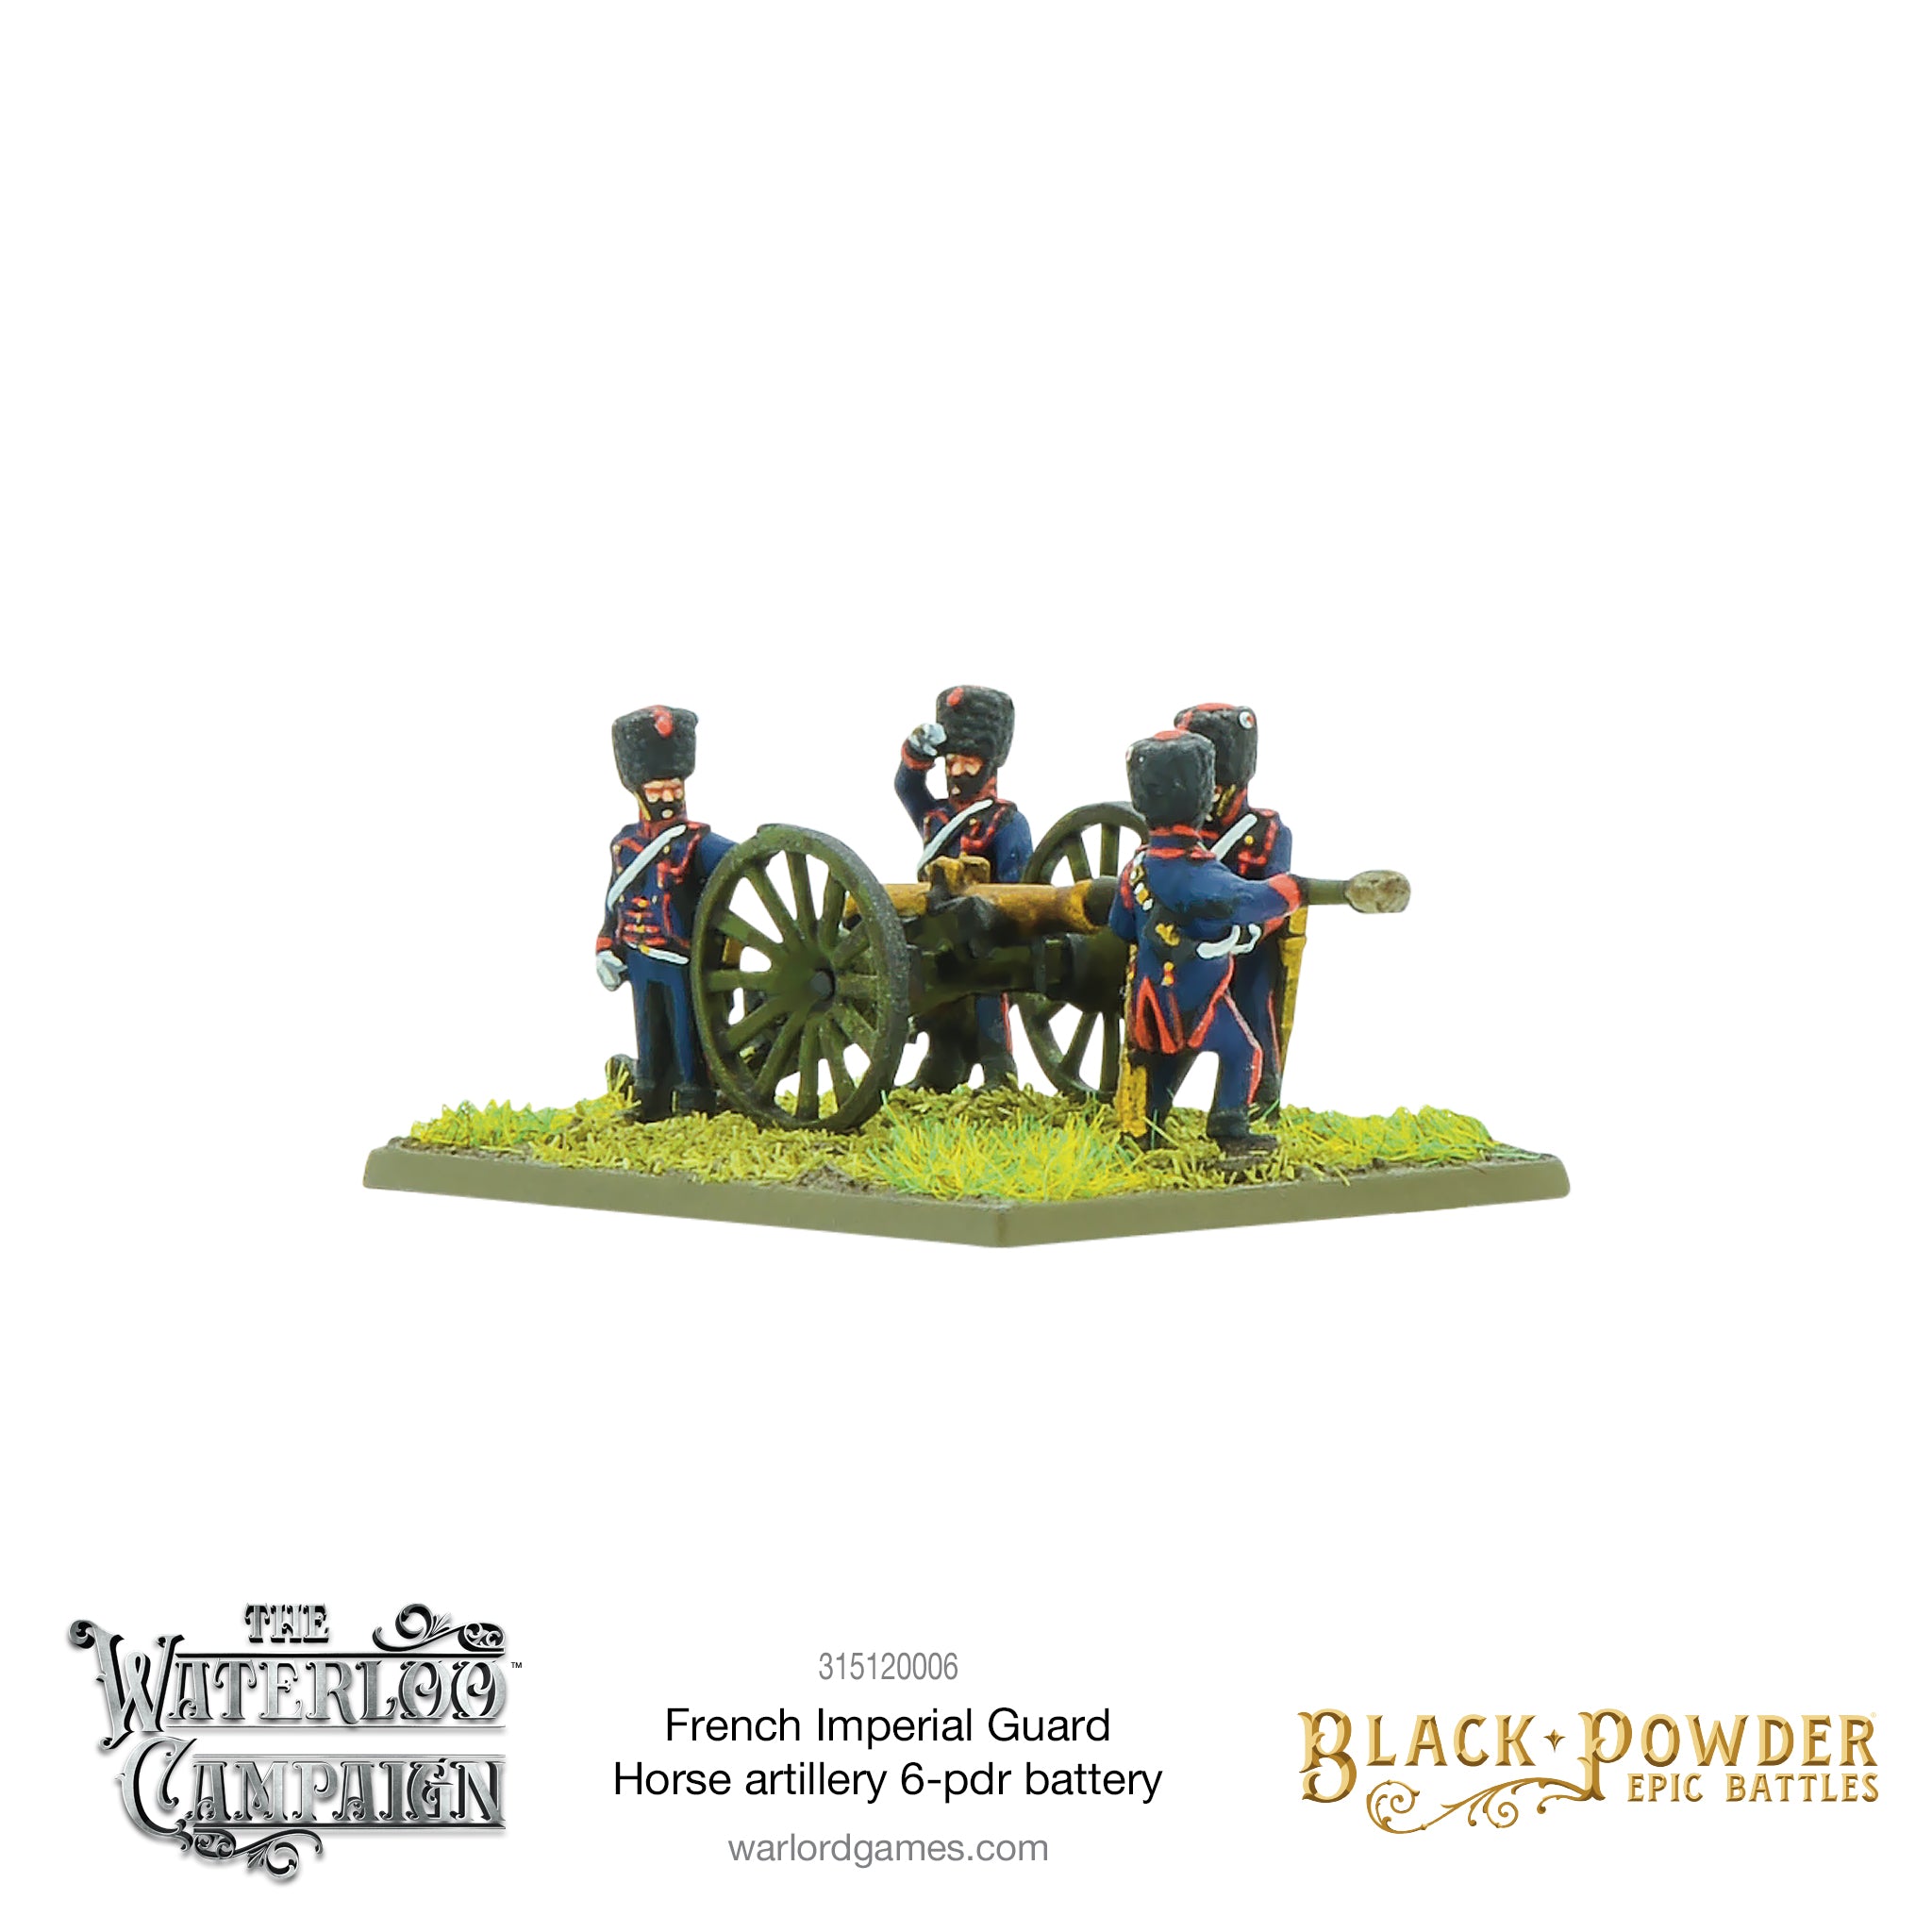 Black Powder Epic Battles: Waterloo - French Imperial Guard Horse artillery 6-pdr battery